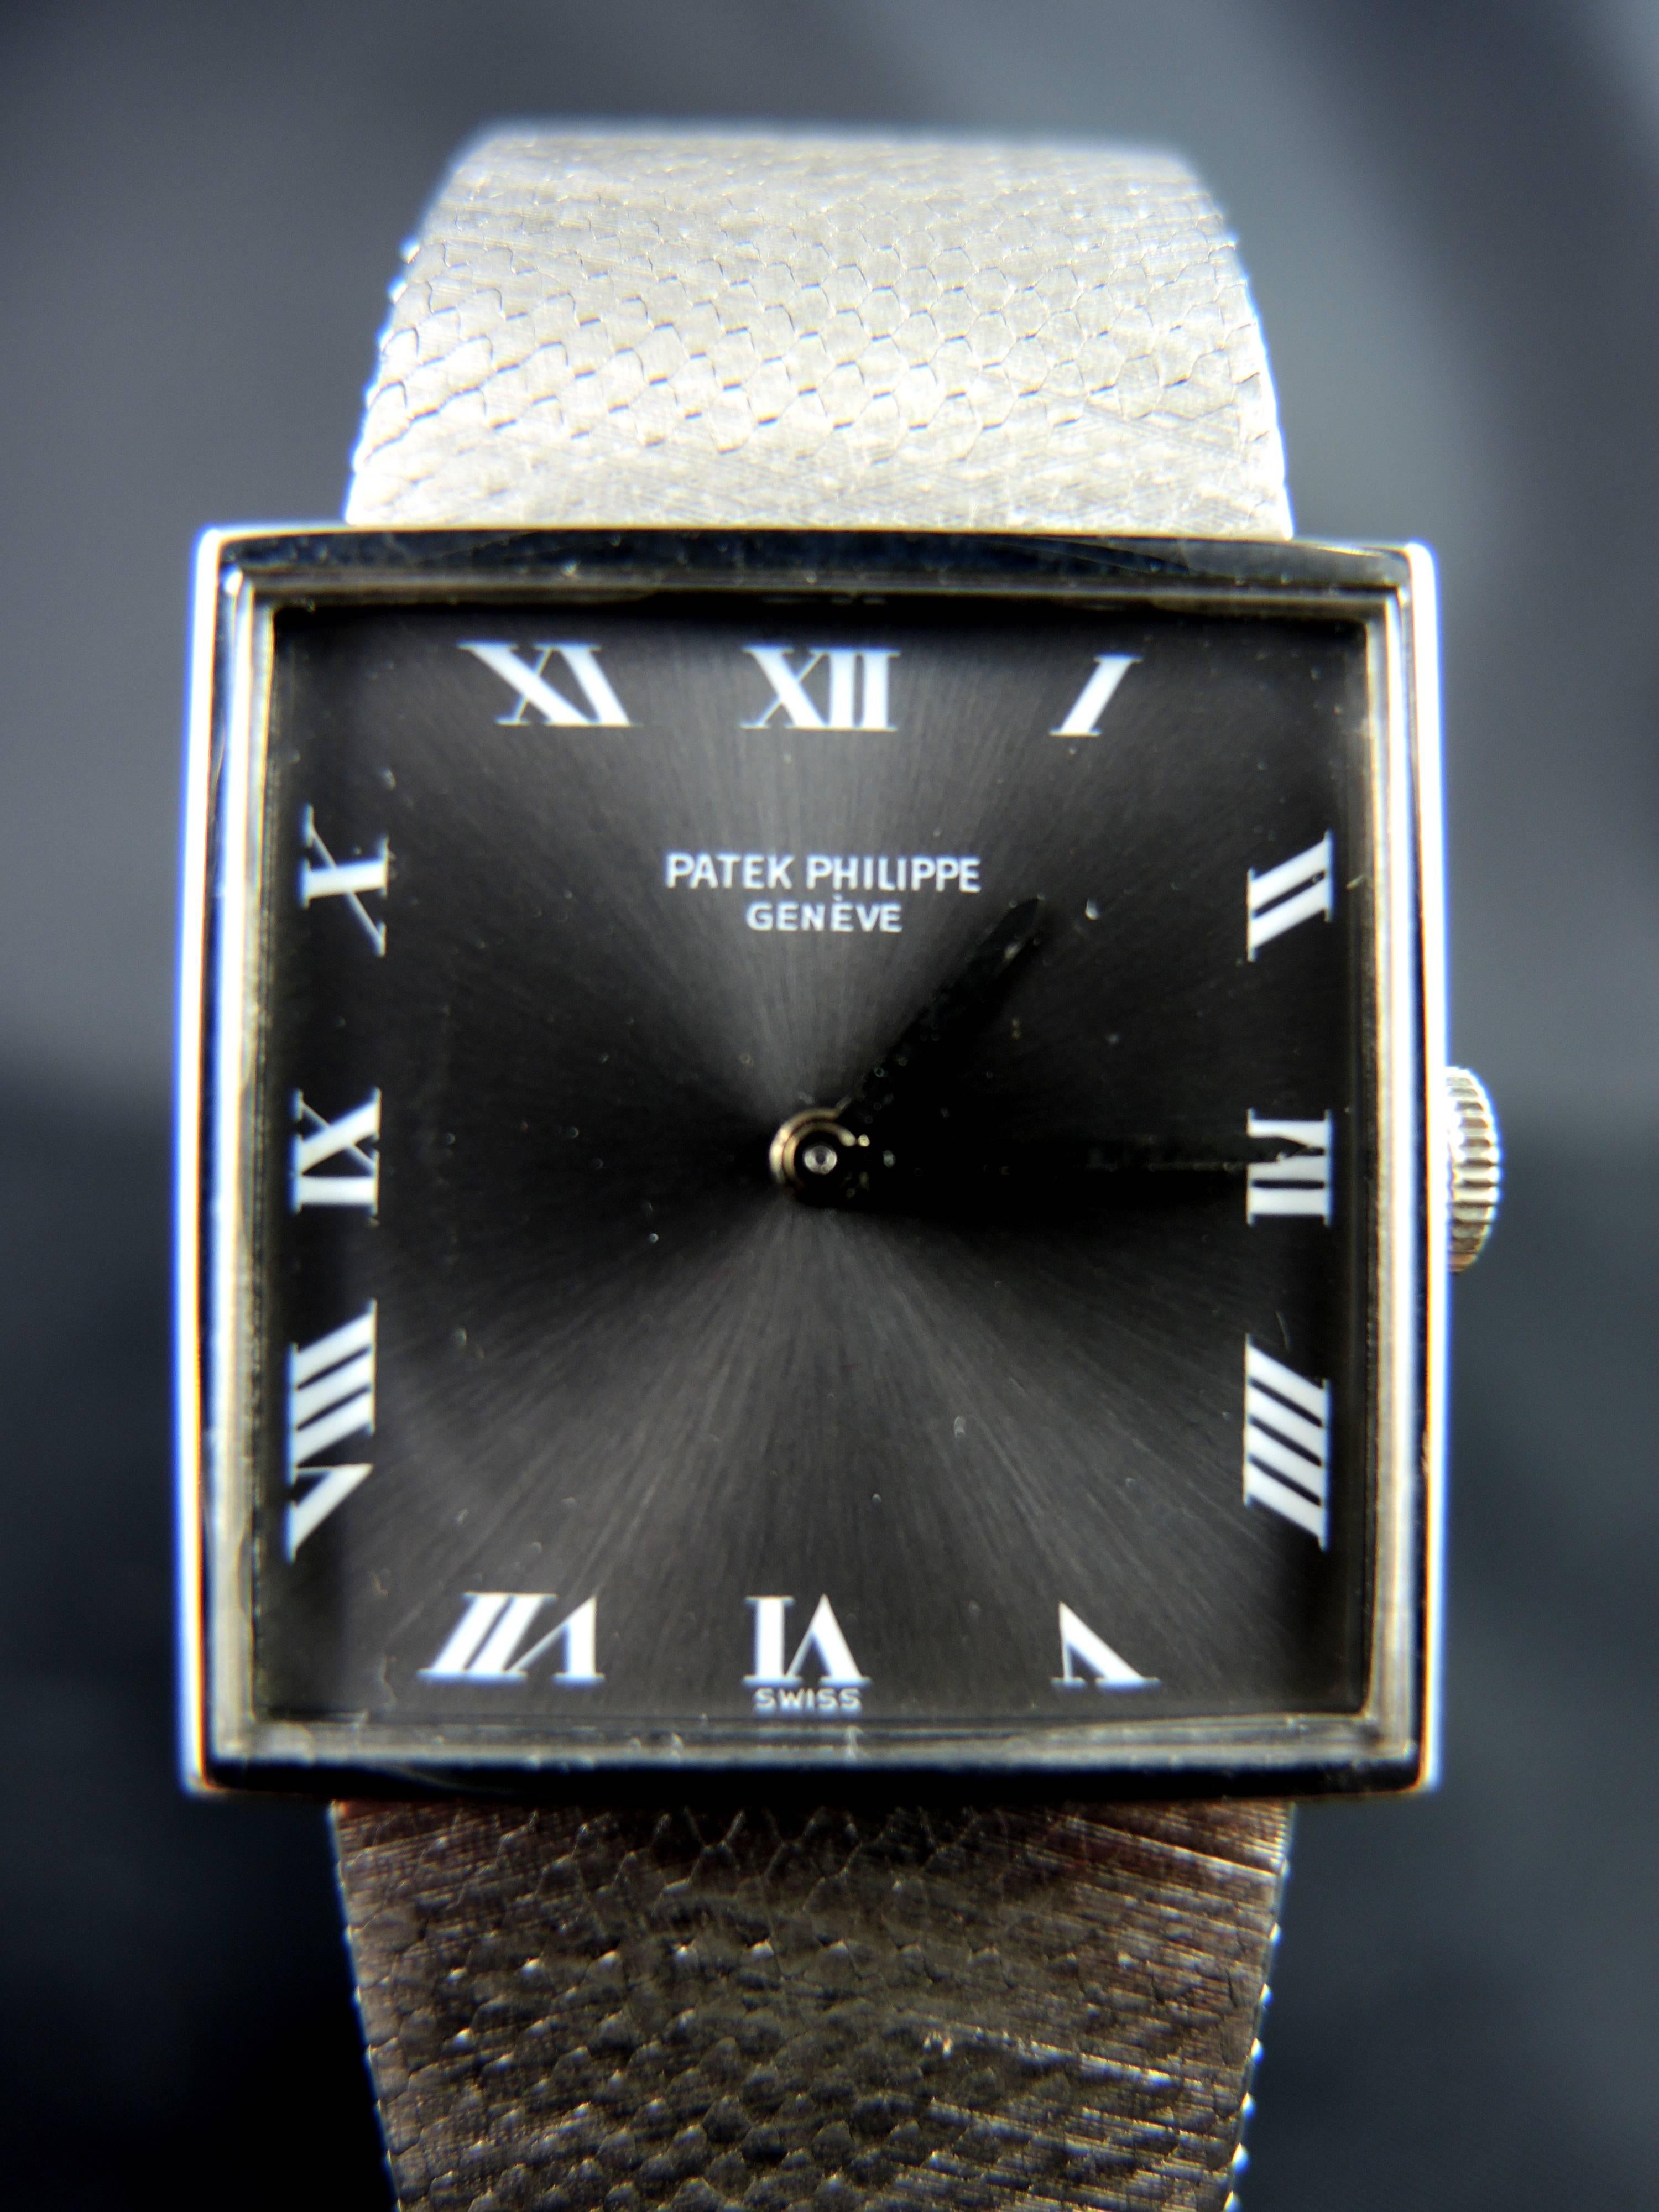 A rare Patek Philippe 18KT white gold wrist watch, ref. 3450/15, made in 1967.

Integral 18KT white gold linen-textured Patek Philippe bracelet.
The grey silvered dial features painted Roman numerals, and black baton hands.
Mineral glass.

Manual